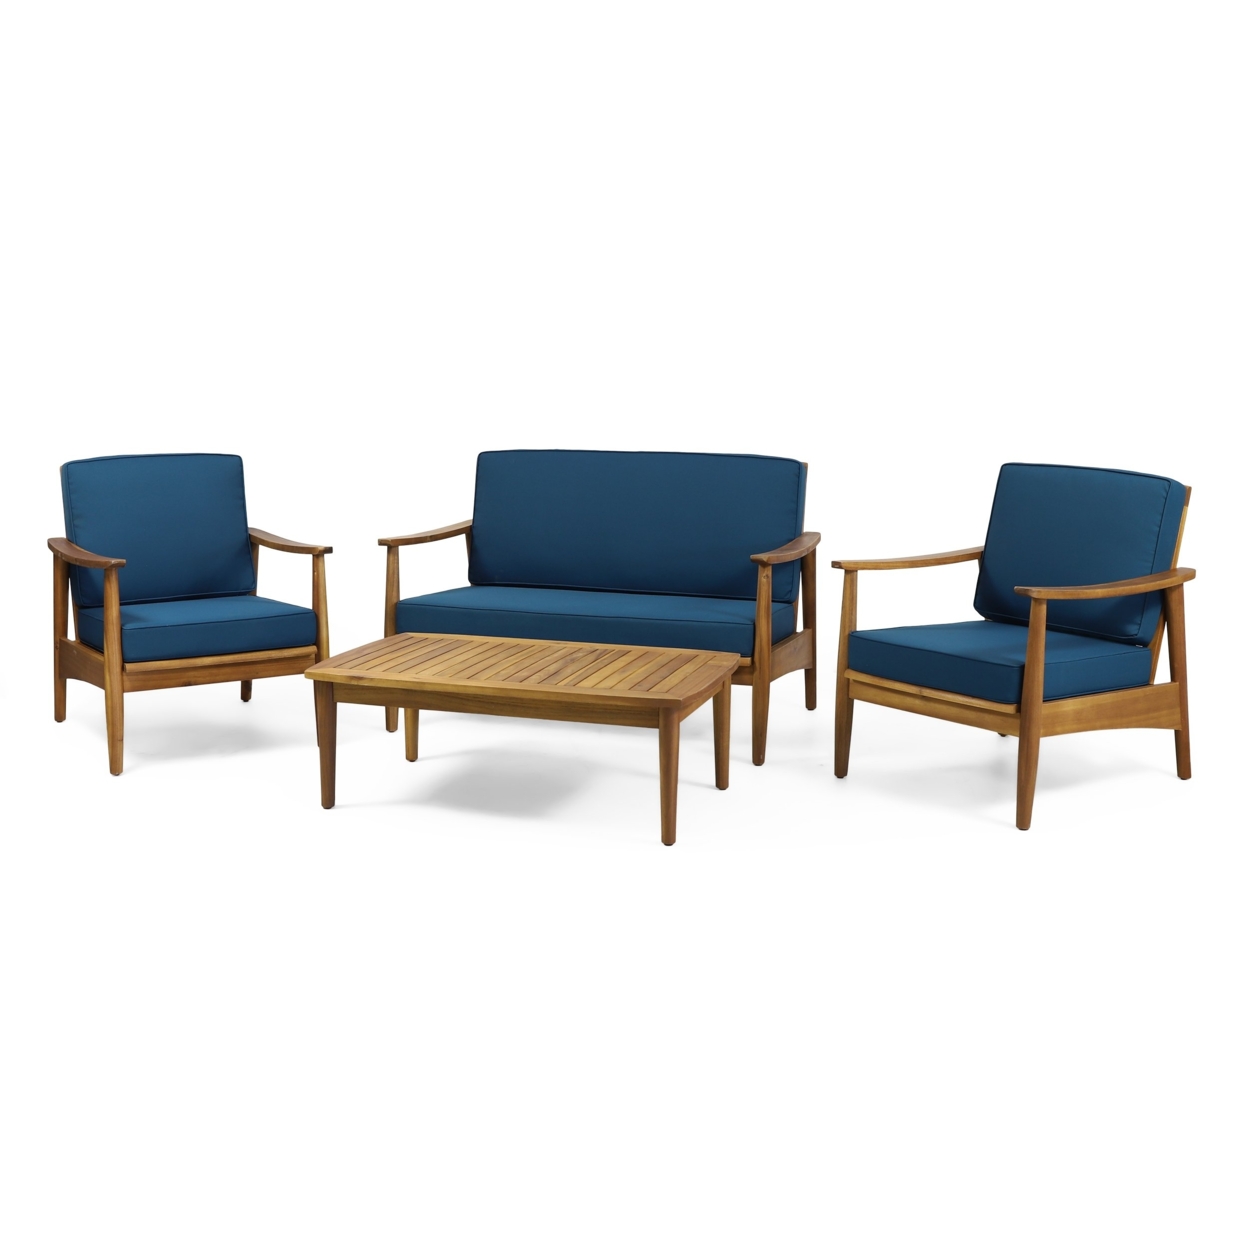 Emmry Outdoor Acacia Wood 4 Seater Chat Set With Coffee Table - Teak/dark Teal